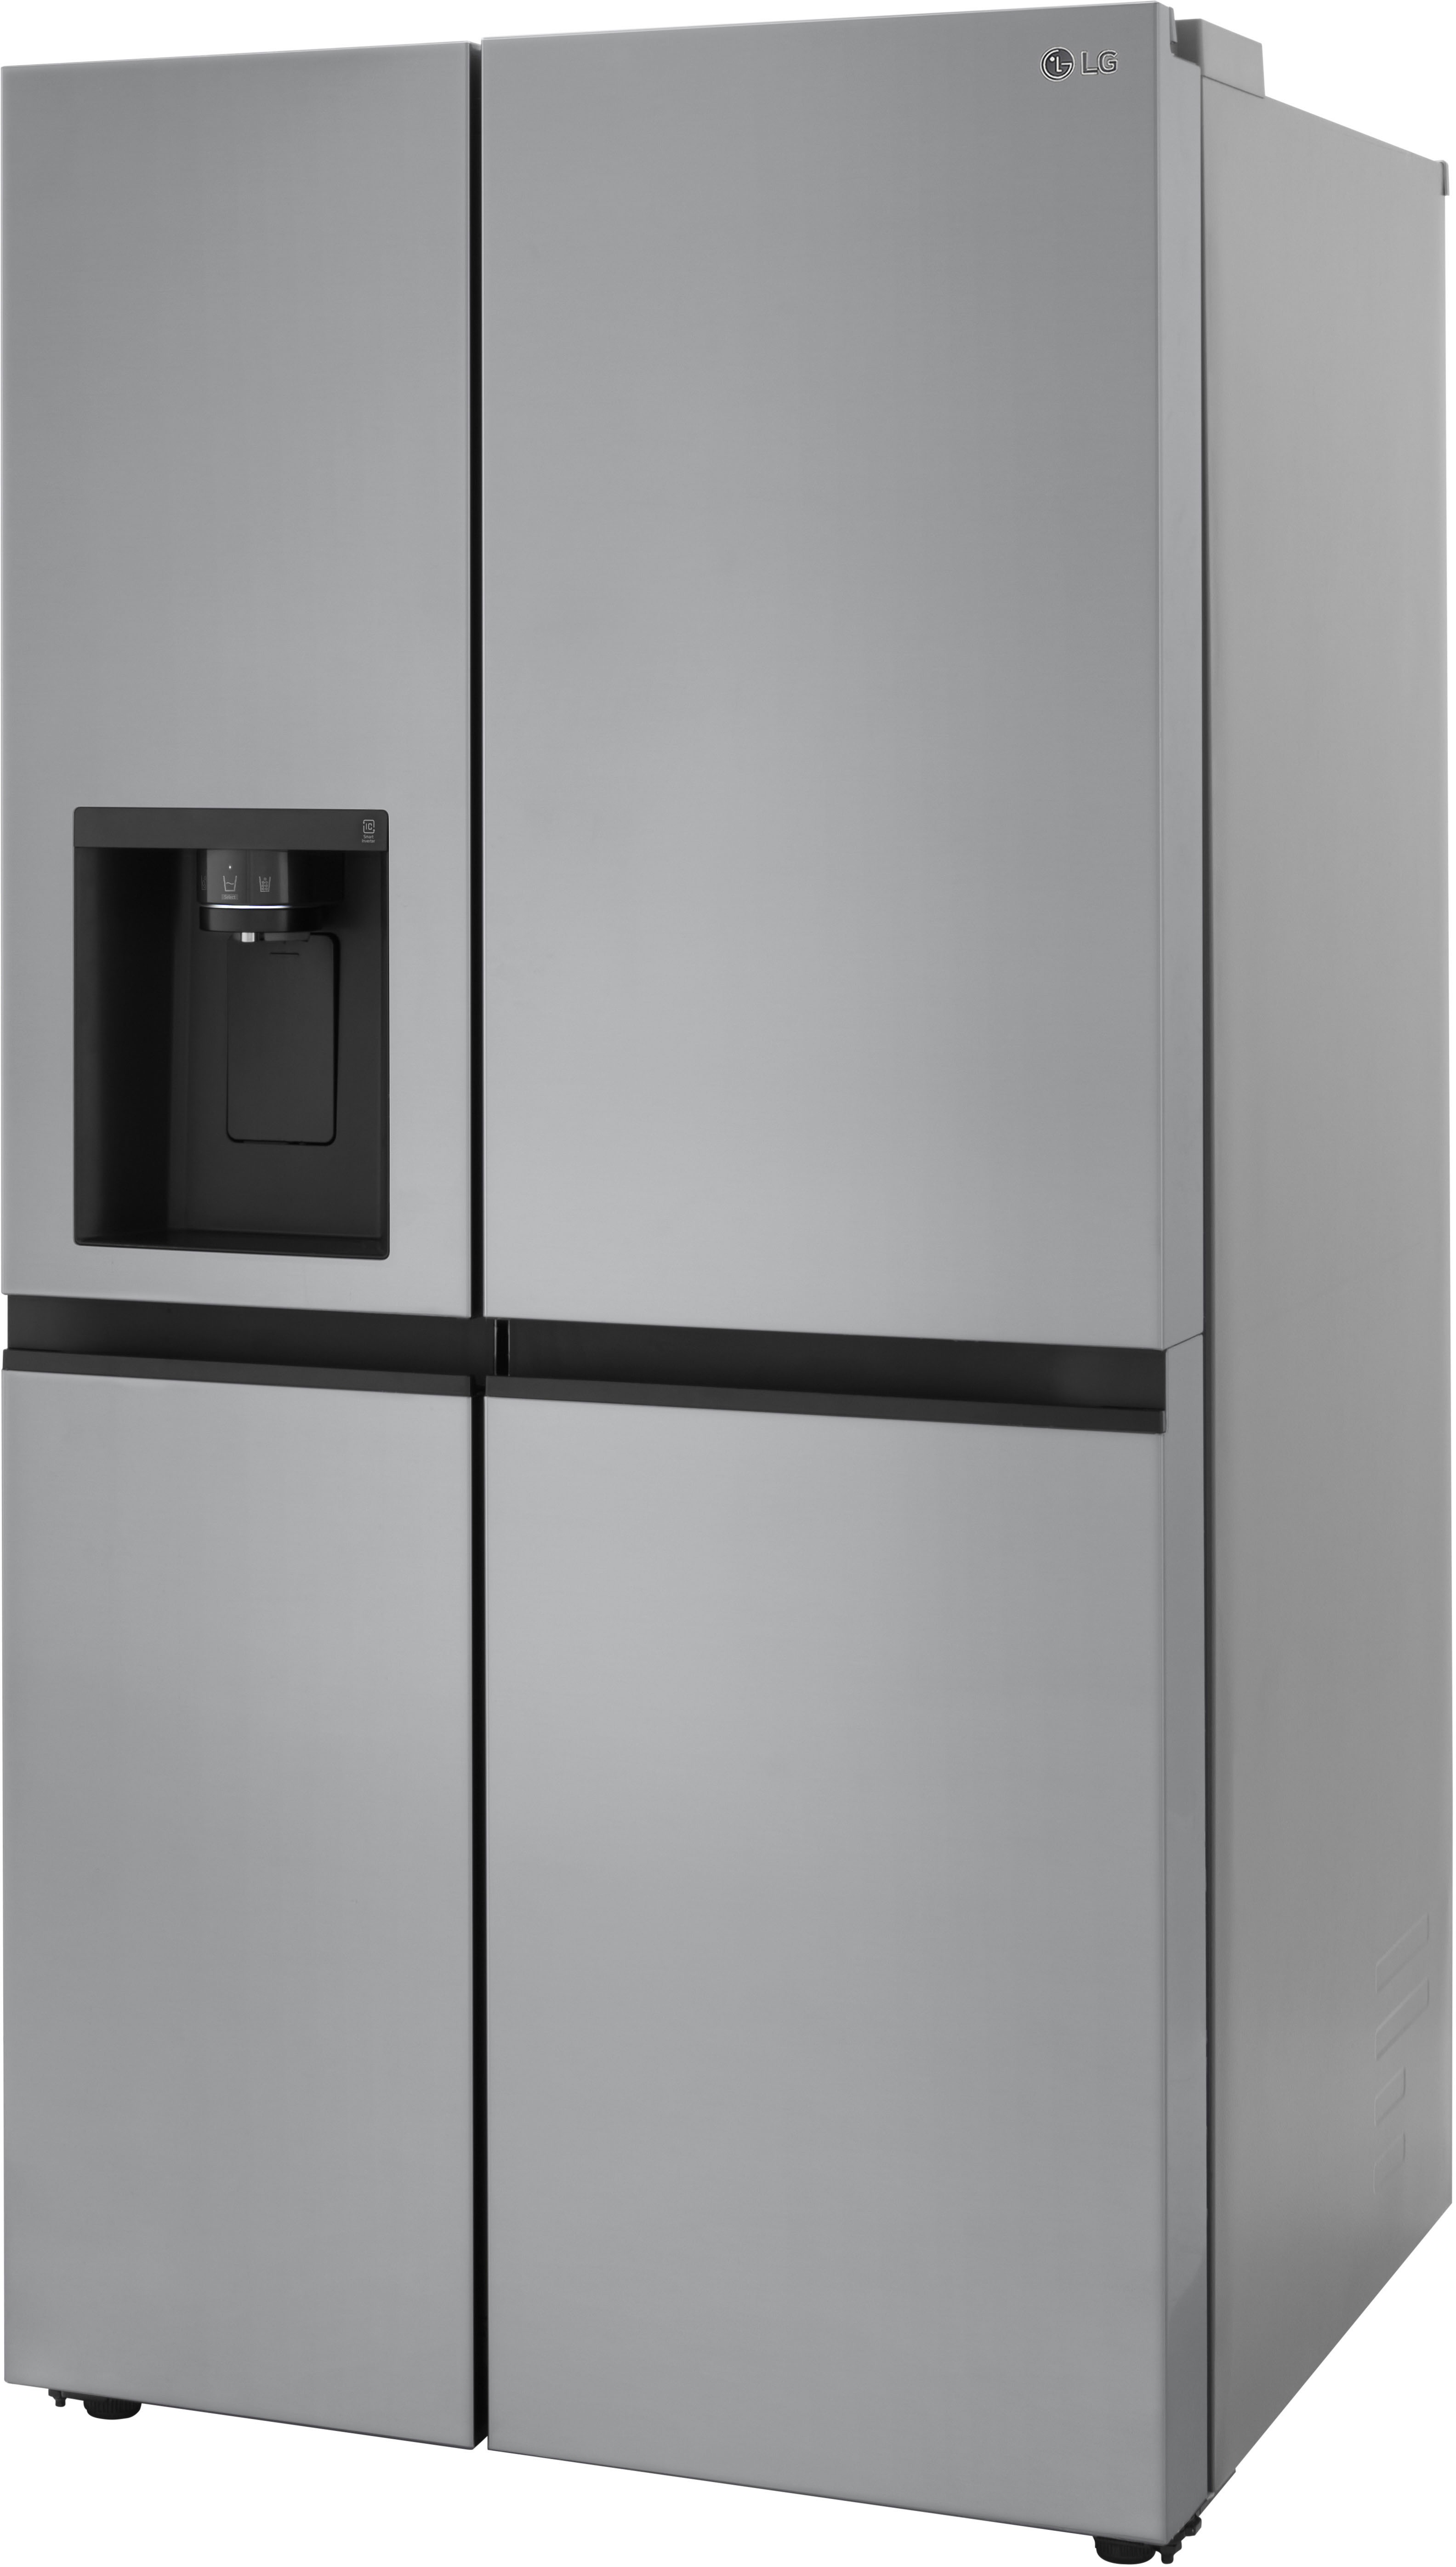 Angle View: LG - 23 Cu. Ft. Side-by-Side Counter-Depth Refrigerator with Smooth Touch Dispenser - Stainless steel